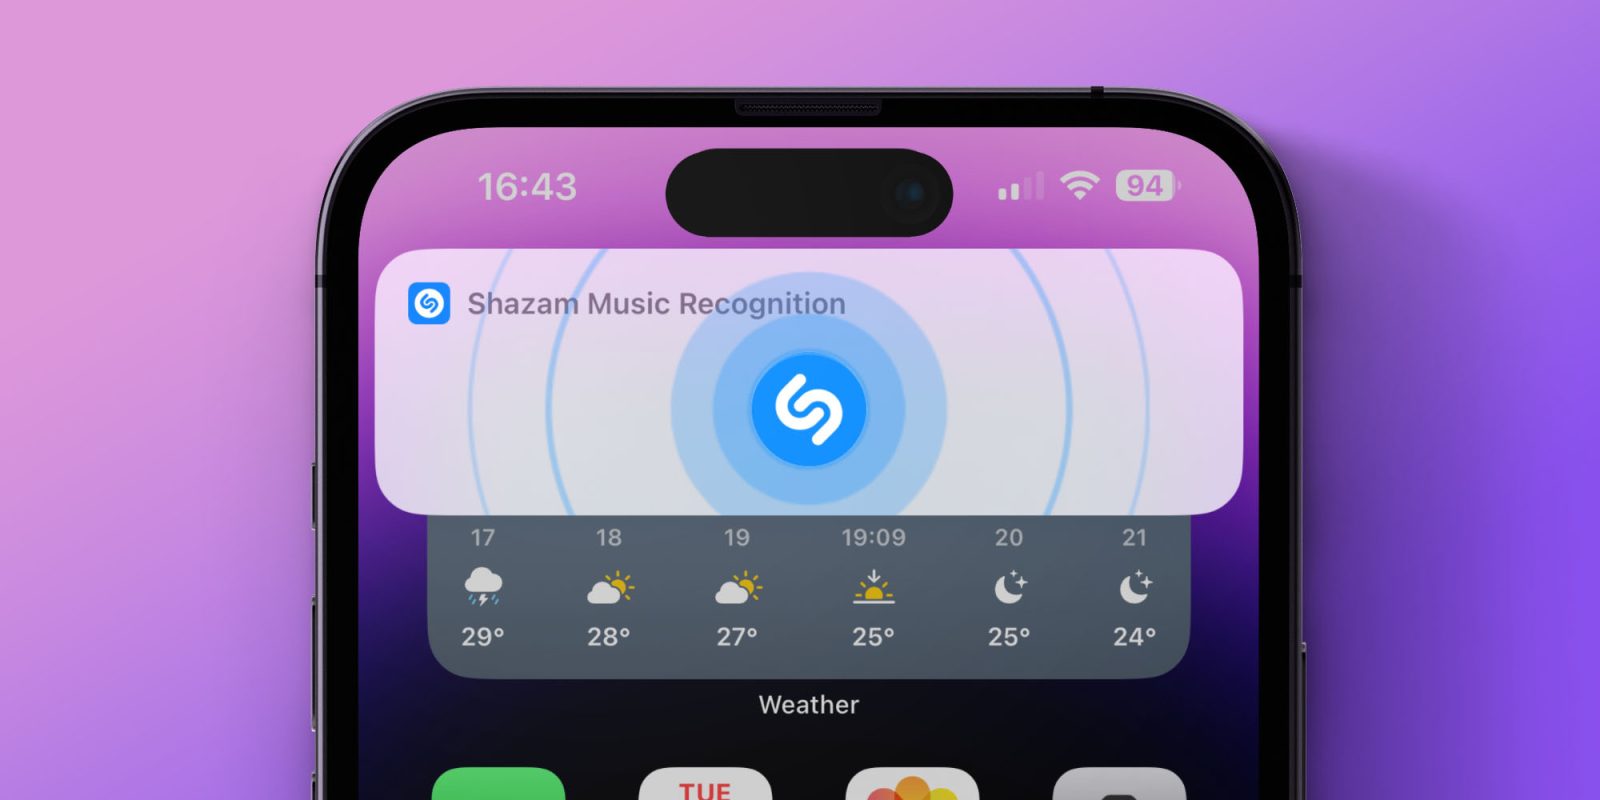 iOS 16.3 adds new animation for when you ask Siri to identify a song with Shazam